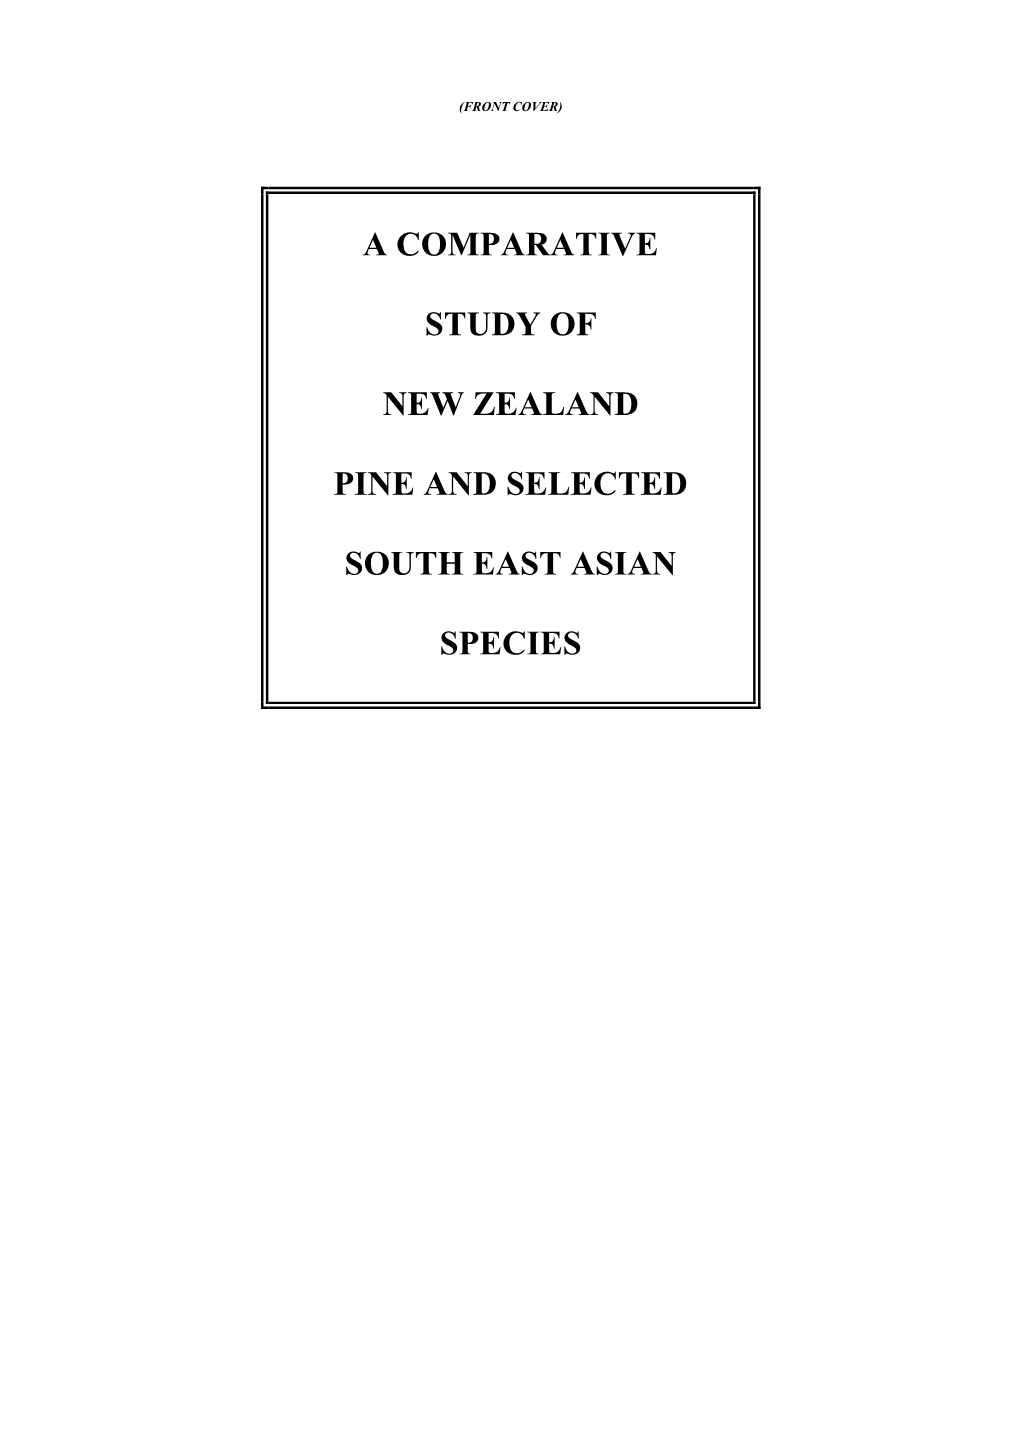 Comparative Study of NZ Pine & Selected SE Asian Species